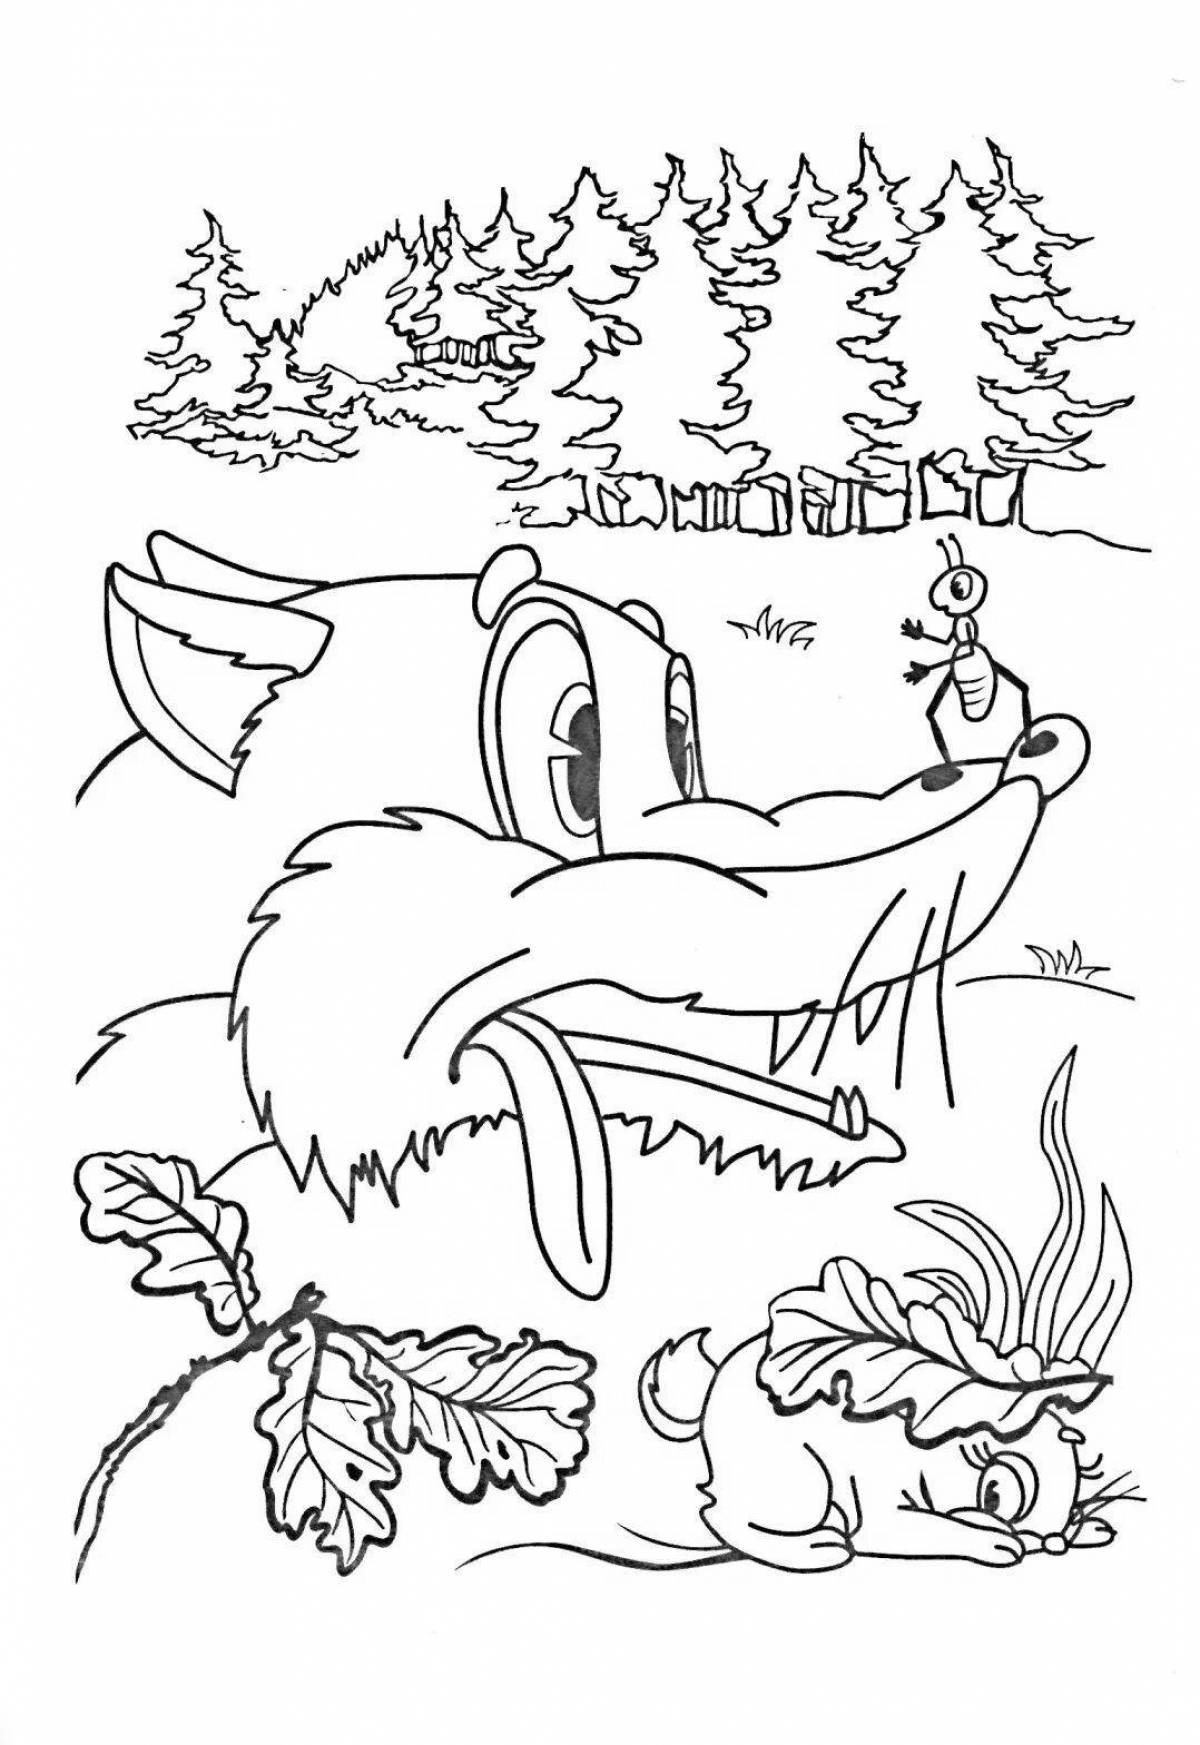 Bianca tails colorful coloring page